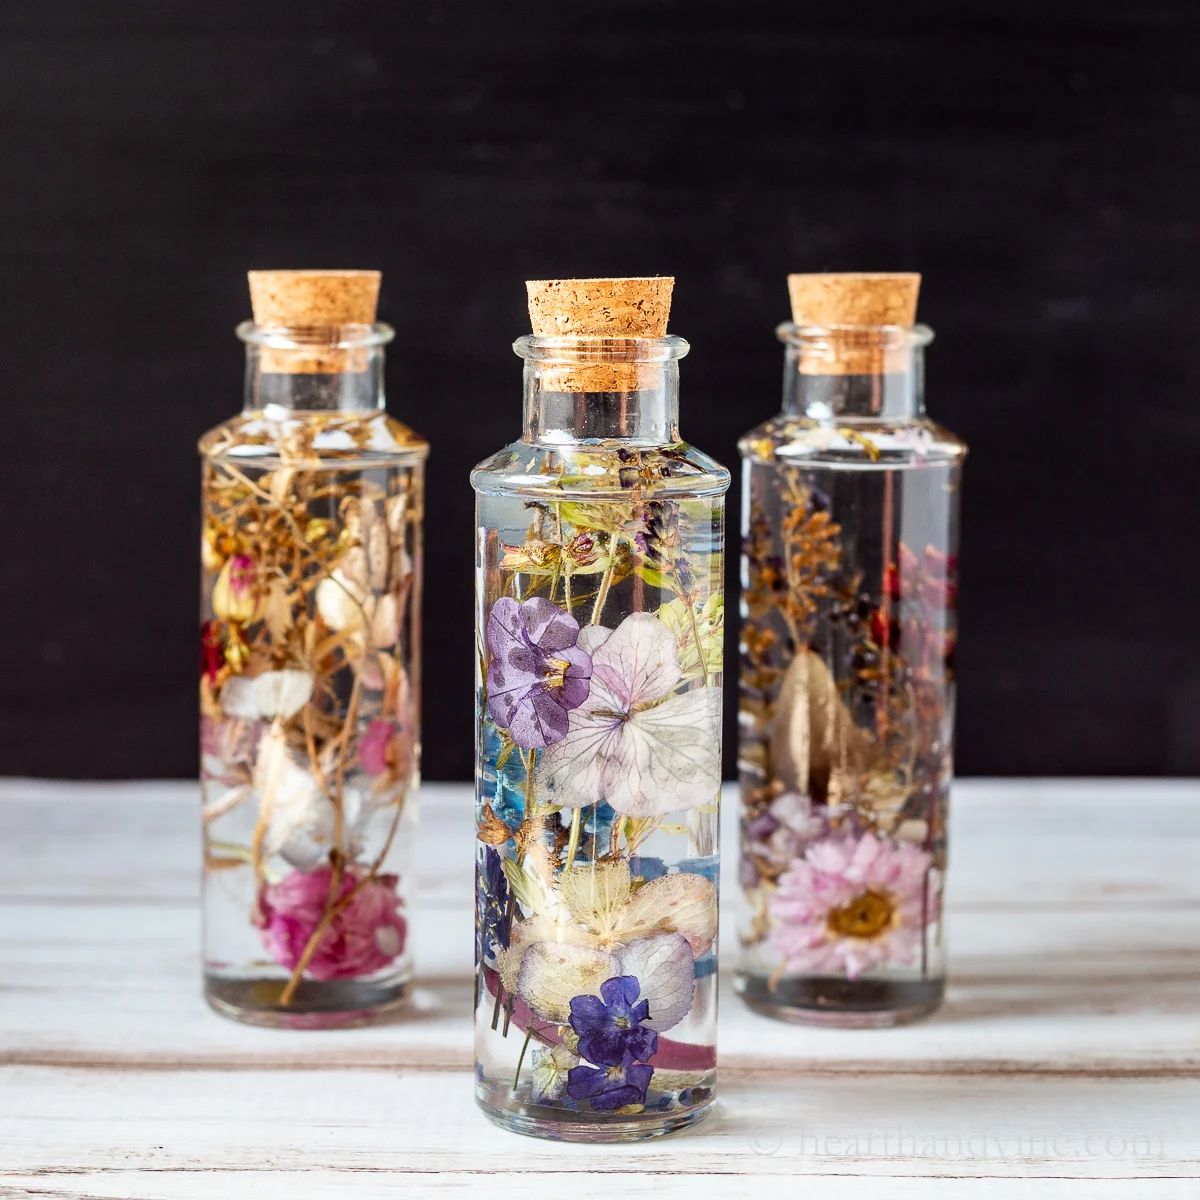 20+ Dried Flower Crafts to Beautify Your Home and Gift Giving